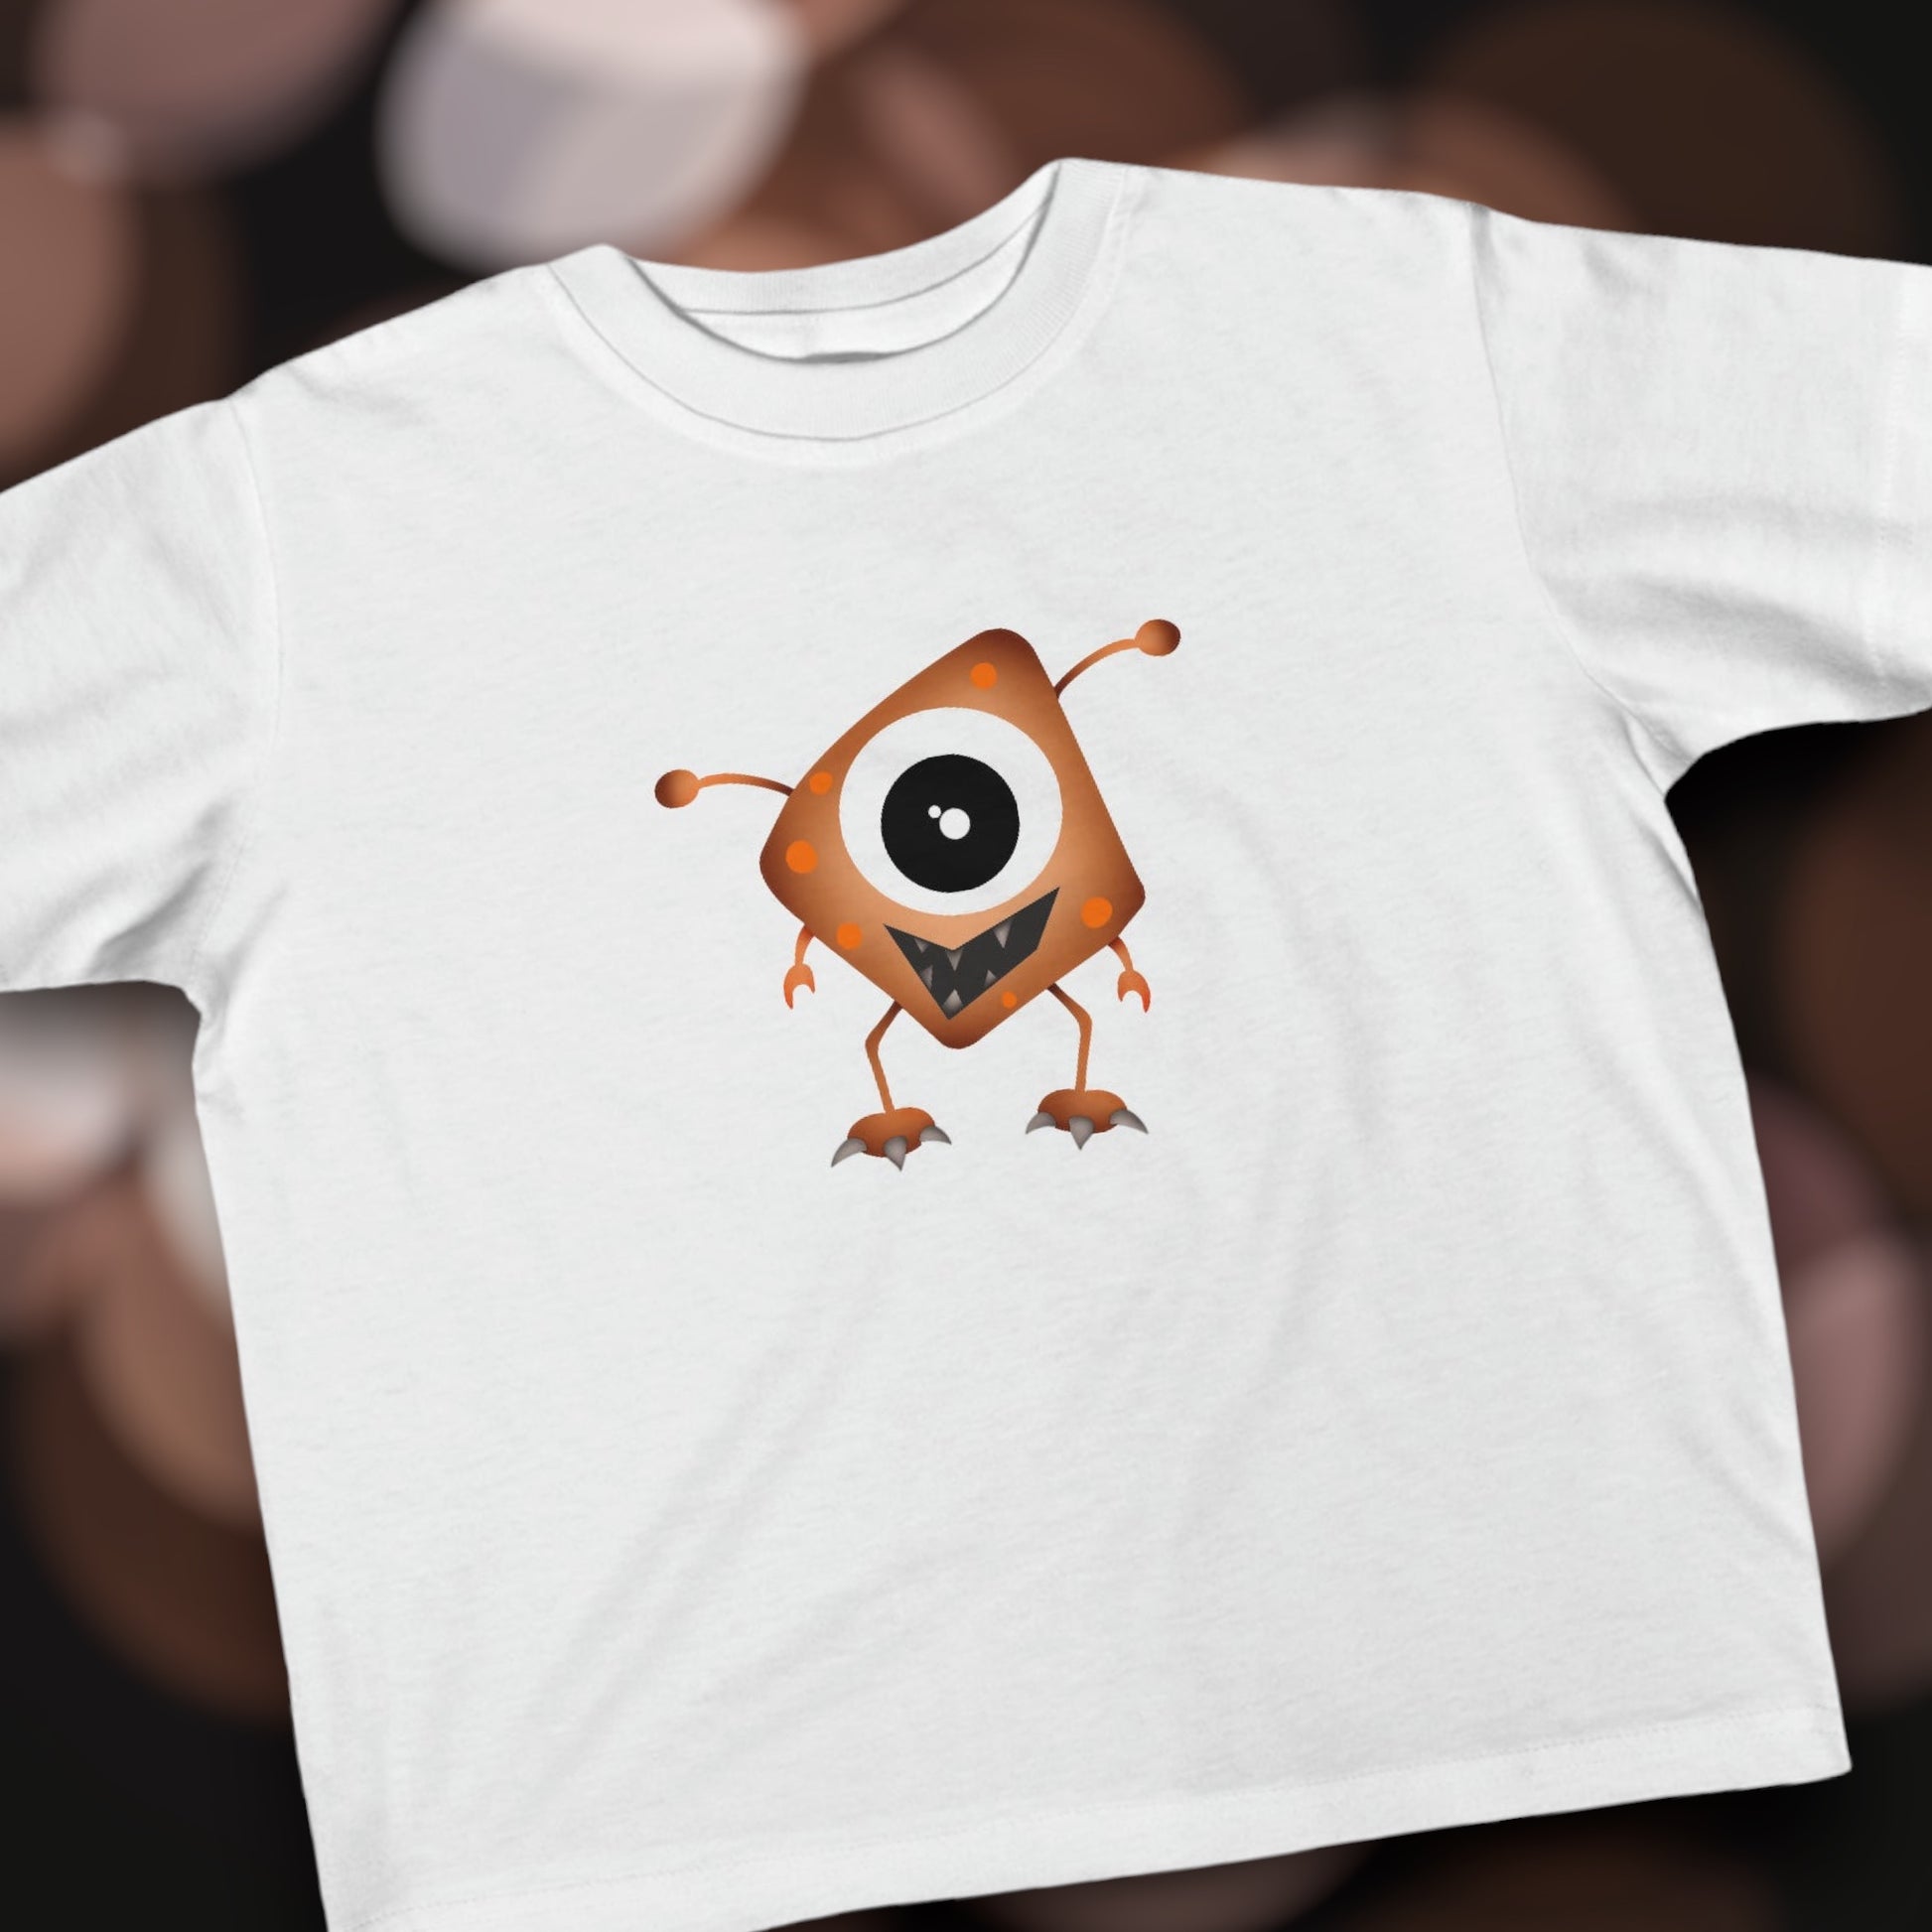 "Playful One-Eyed Monster" Toddler Shirt - Weave Got Gifts - Unique Gifts You Won’t Find Anywhere Else!